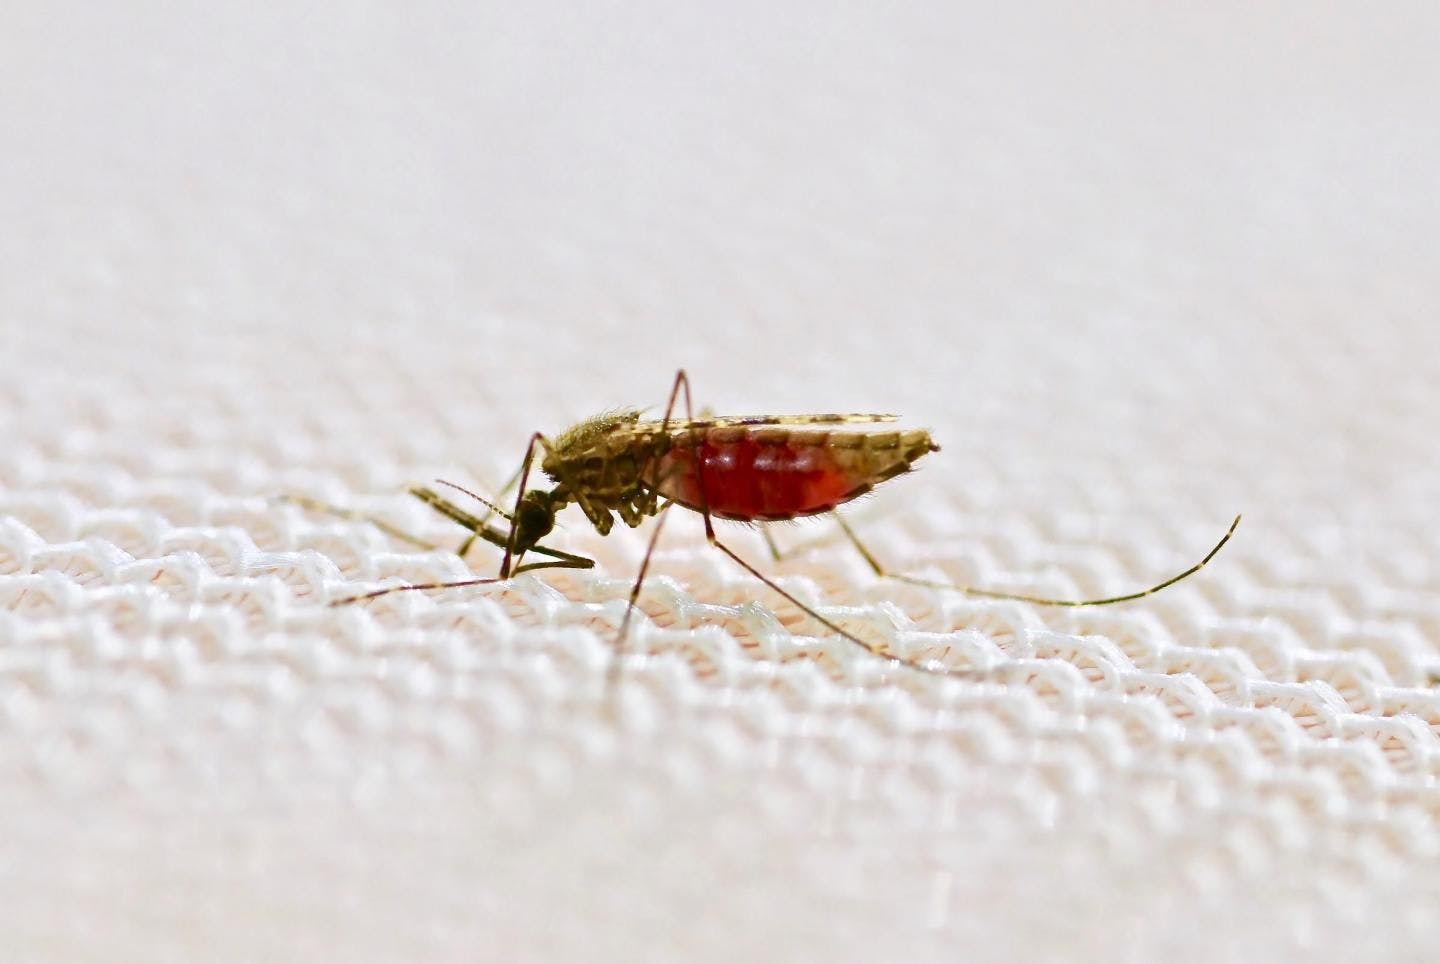 To Slow Malaria, Cure Mosquitoes With Drug-Treated Bed Nets